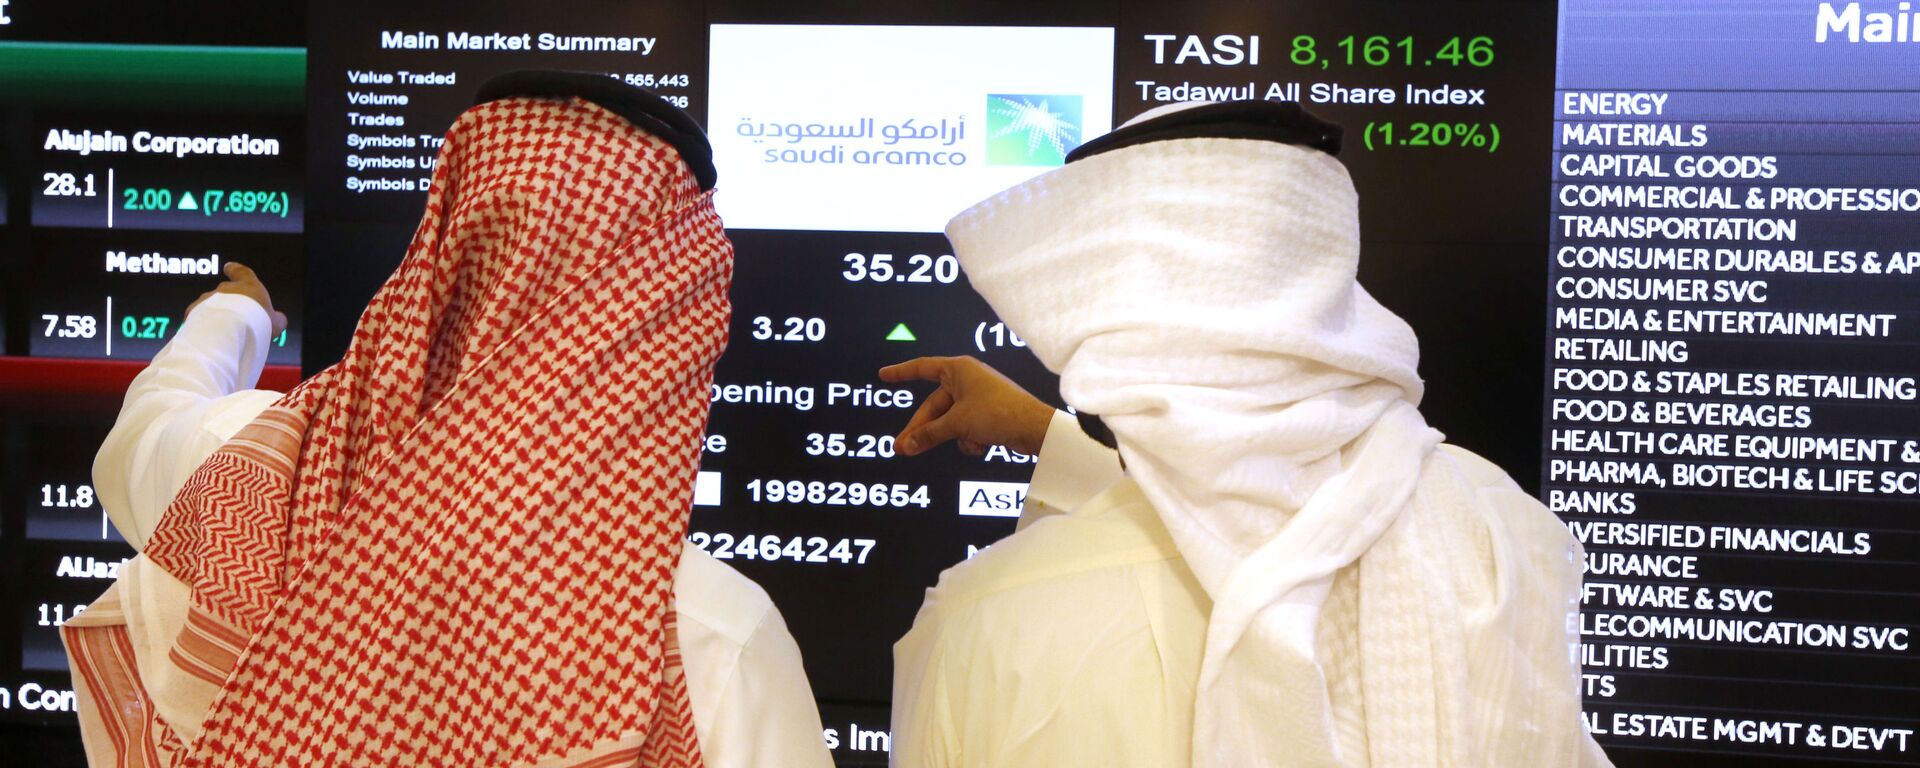 Saudi stock market officials watch the market screen displaying Saudi Arabia's state-owned oil company Aramco after the debut of Aramco's initial public offering (IPO) on the Riyadh's stock market in Riyadh, Saudi Arabia, Wednesday, Dec. 11, 2019 - Sputnik International, 1920, 04.06.2023